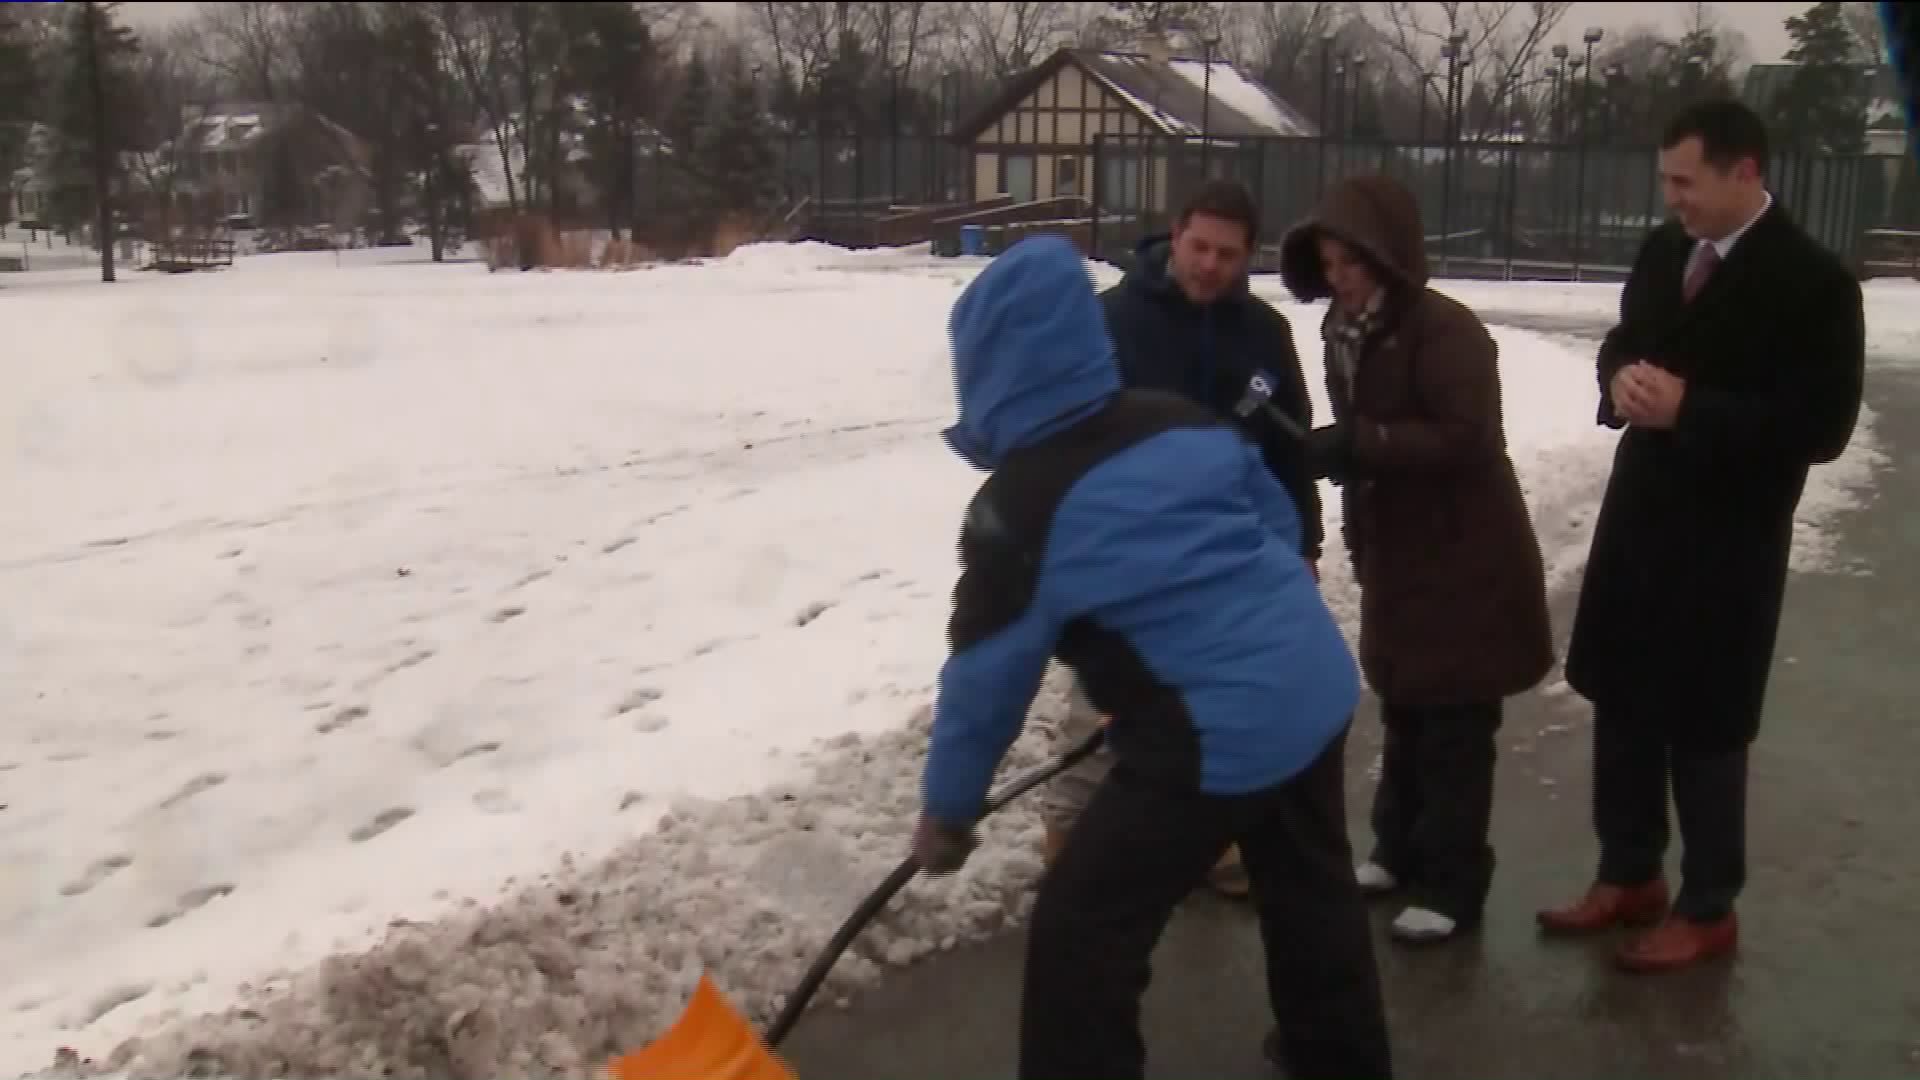 Around Town learns some tips about snow safety